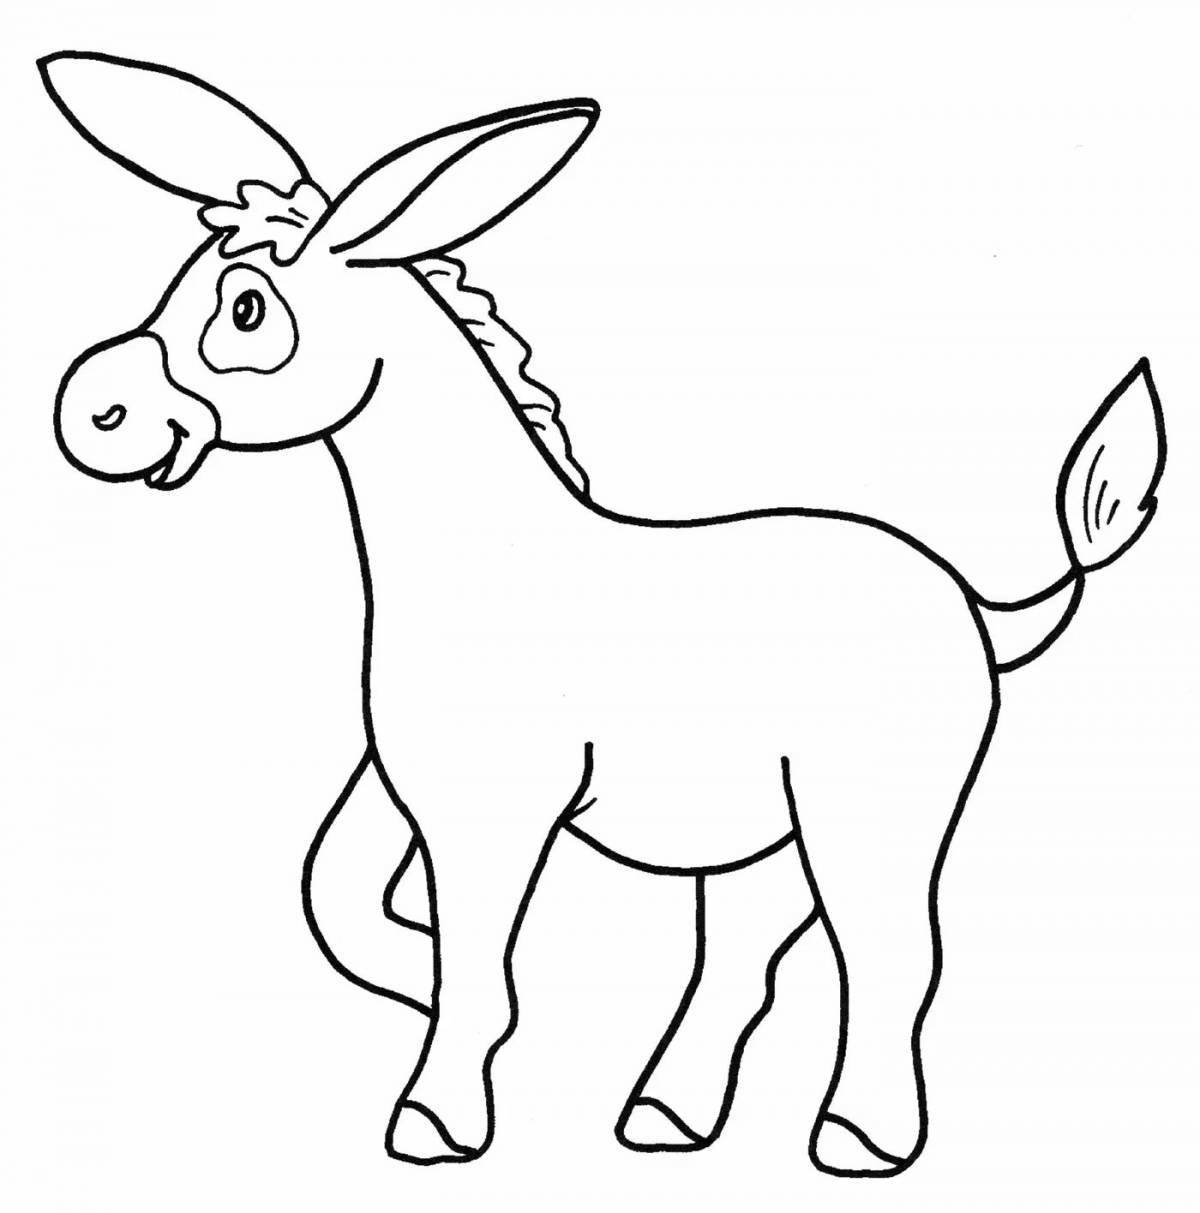 Colourful coloring donkey for children